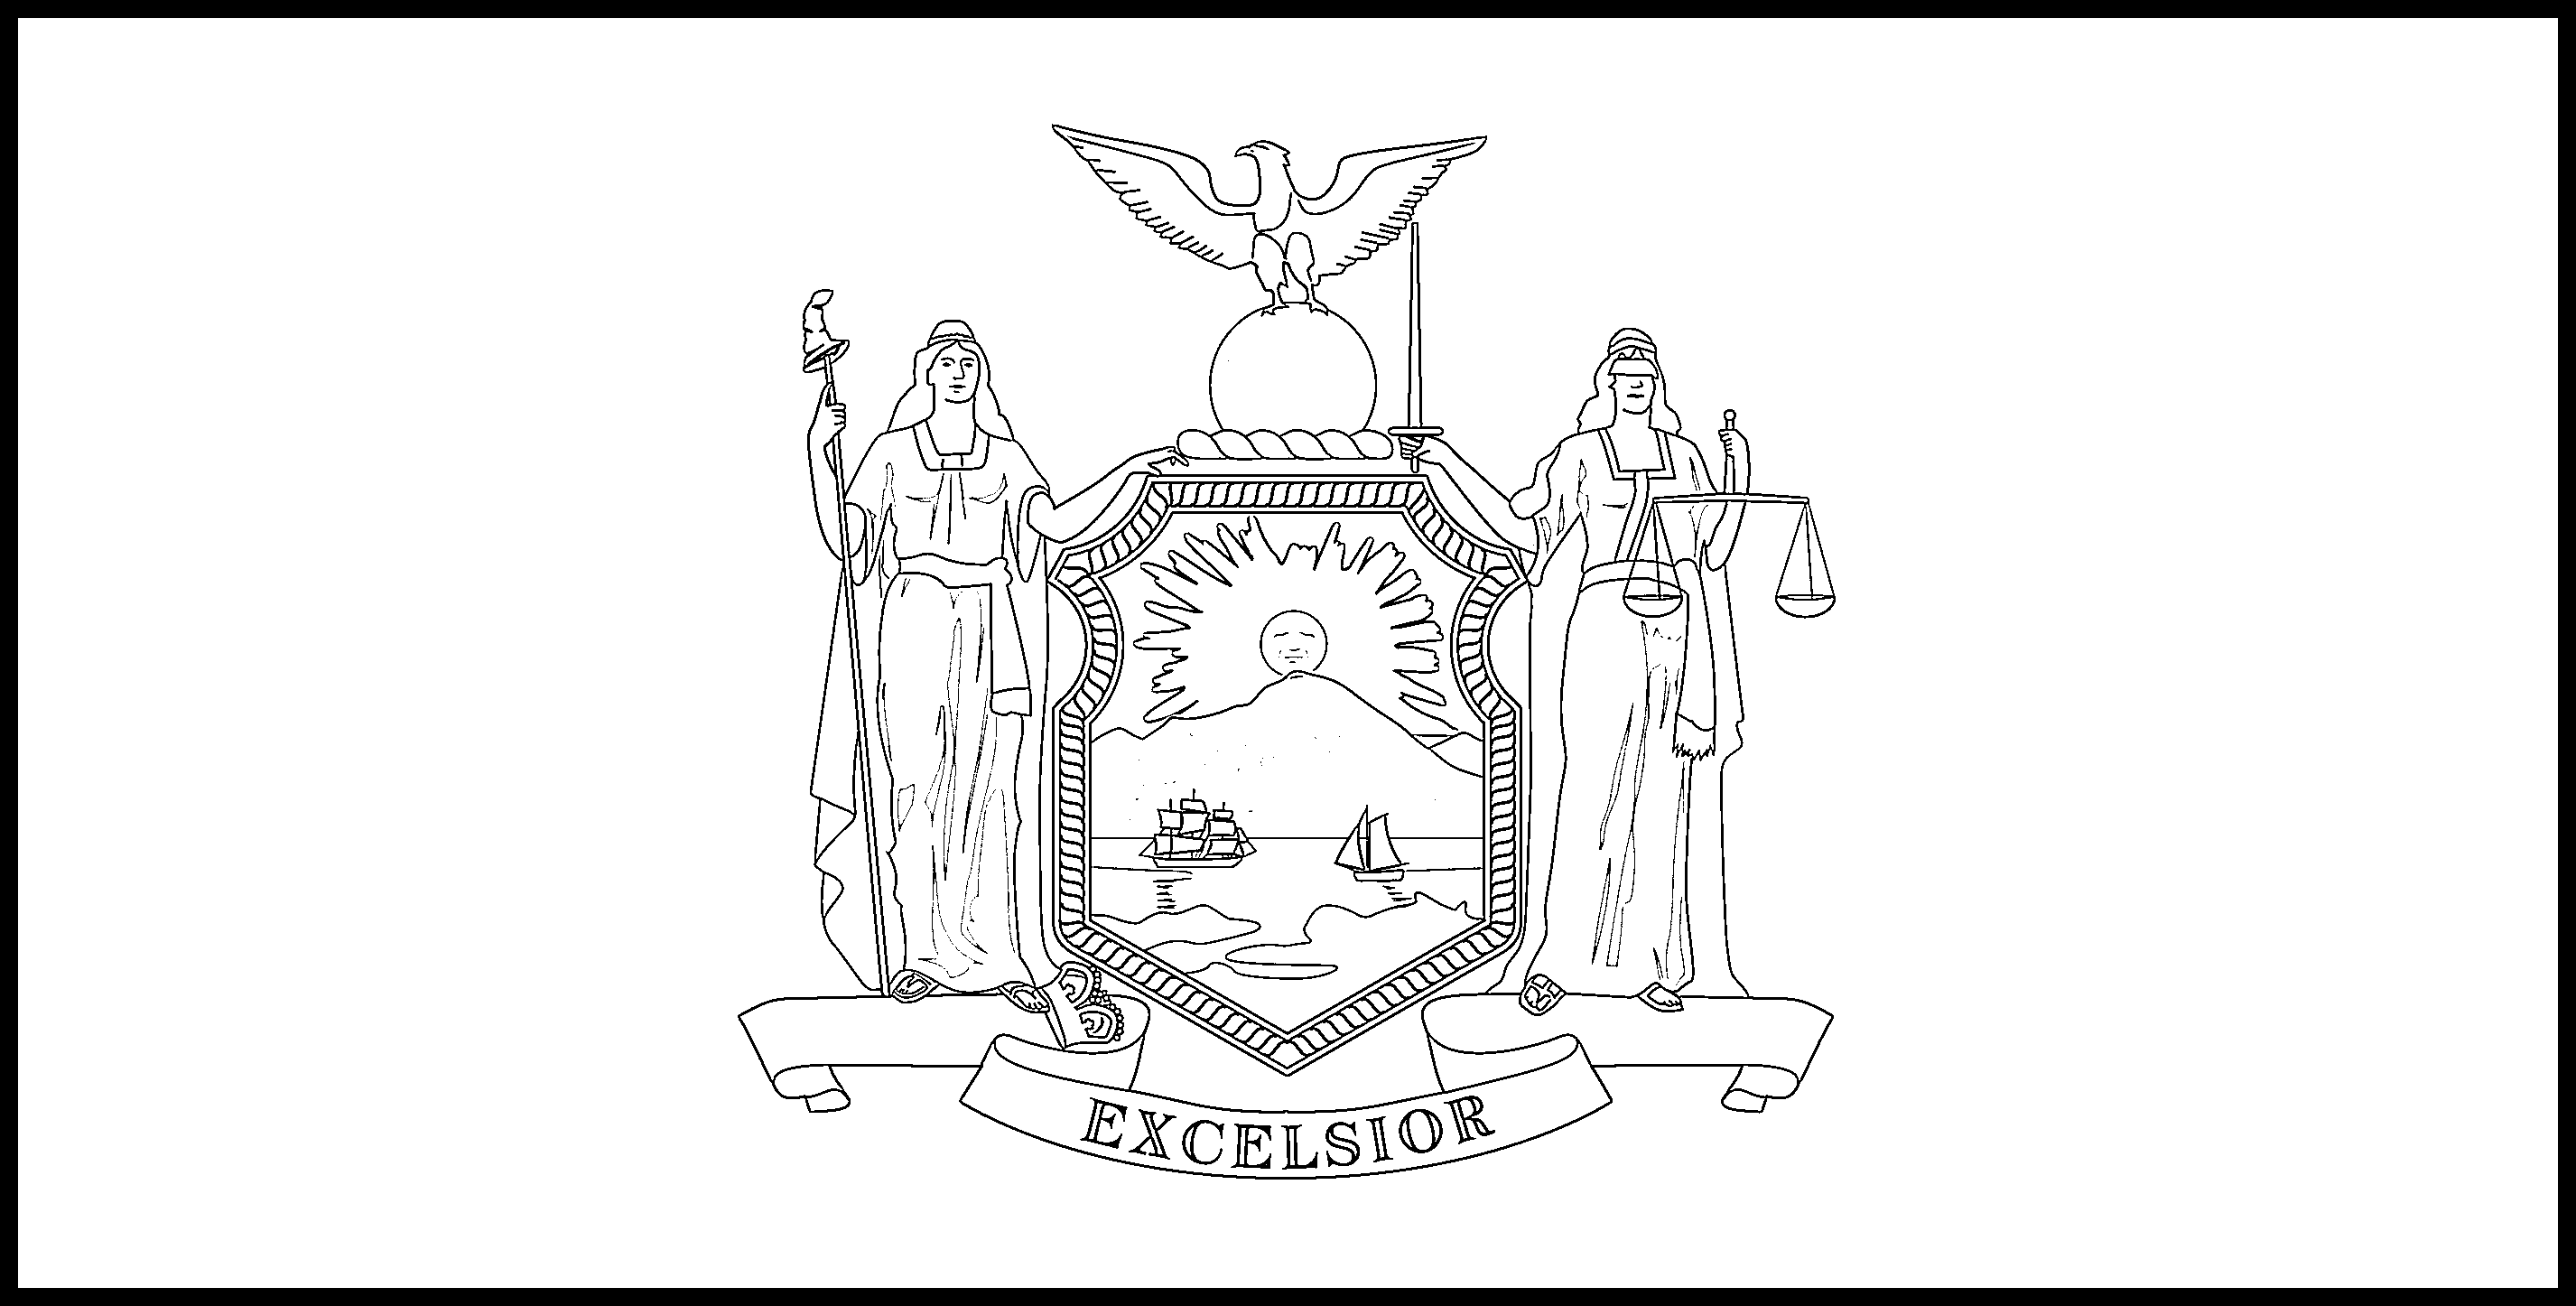 New york flag coloring page â state flag drawing â flags web